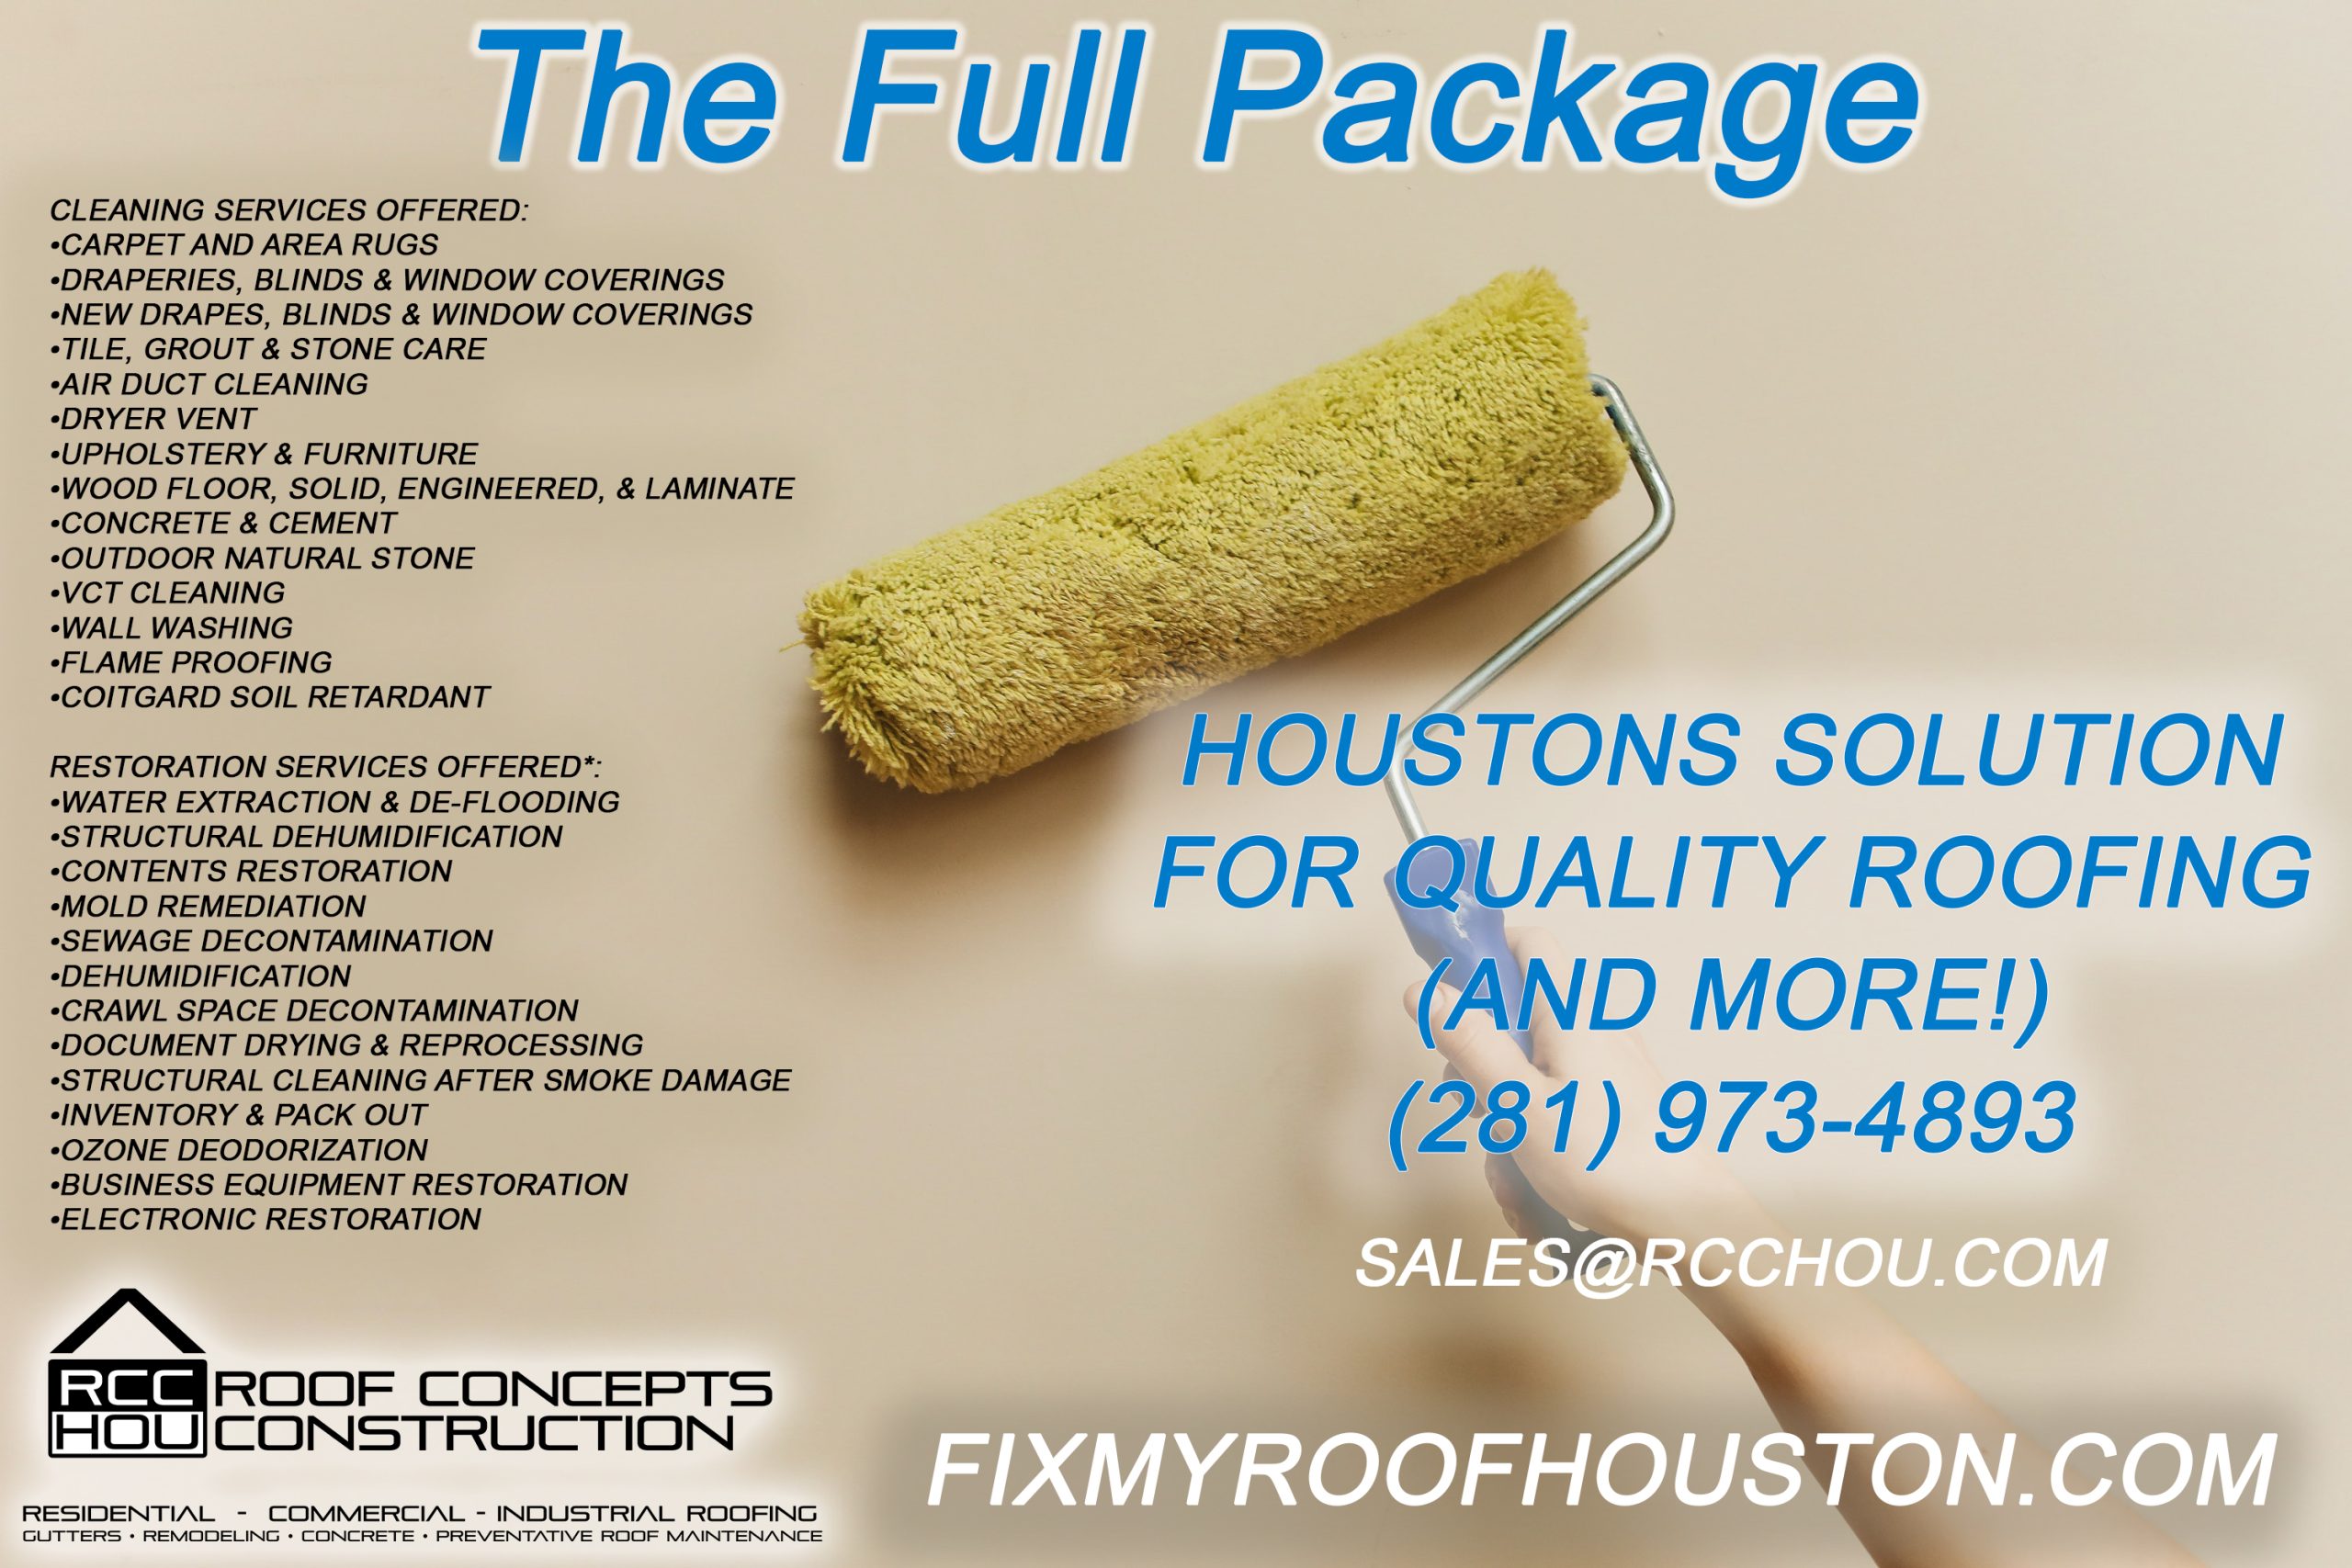 The Full Package - Cleaning services offered